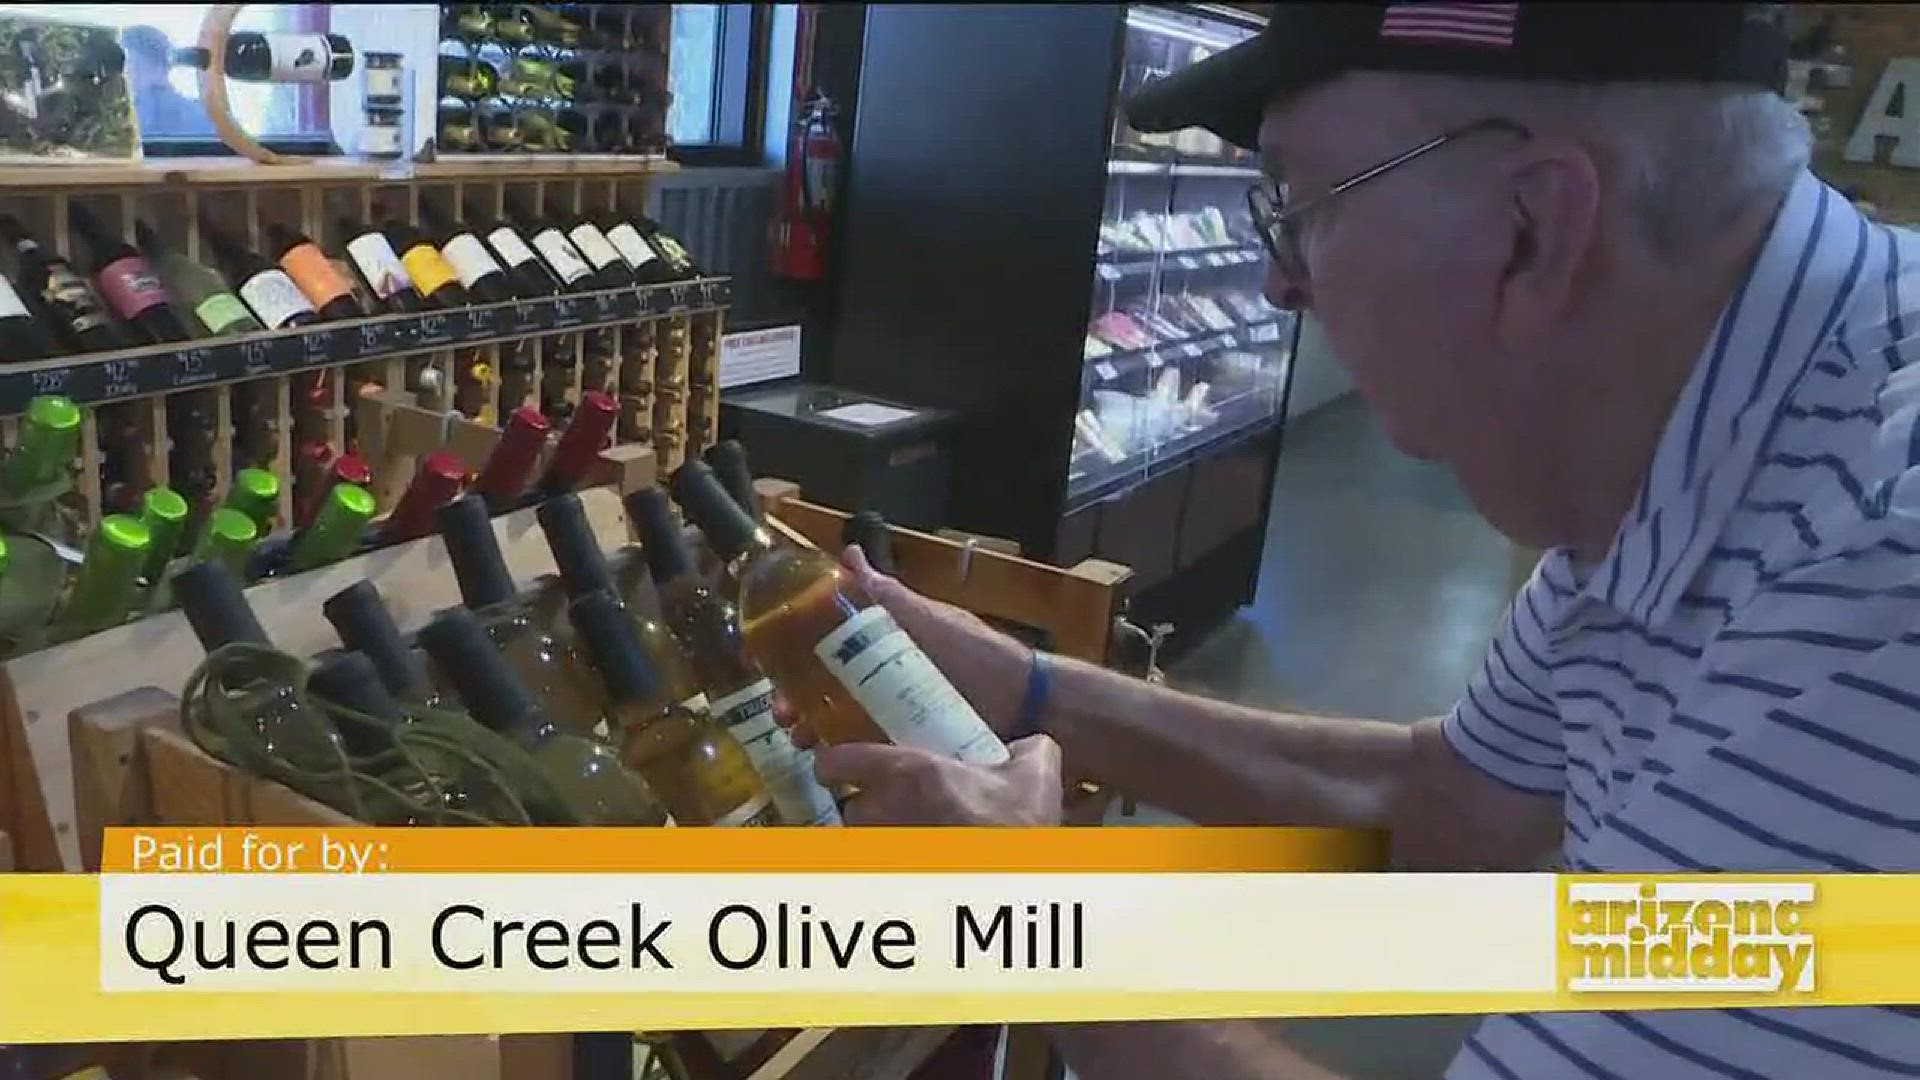 Looking for a weekend getaway? This family owned Olive Mill in Queen Creek has plenty to offer including great food, shopping, and beauty buys!